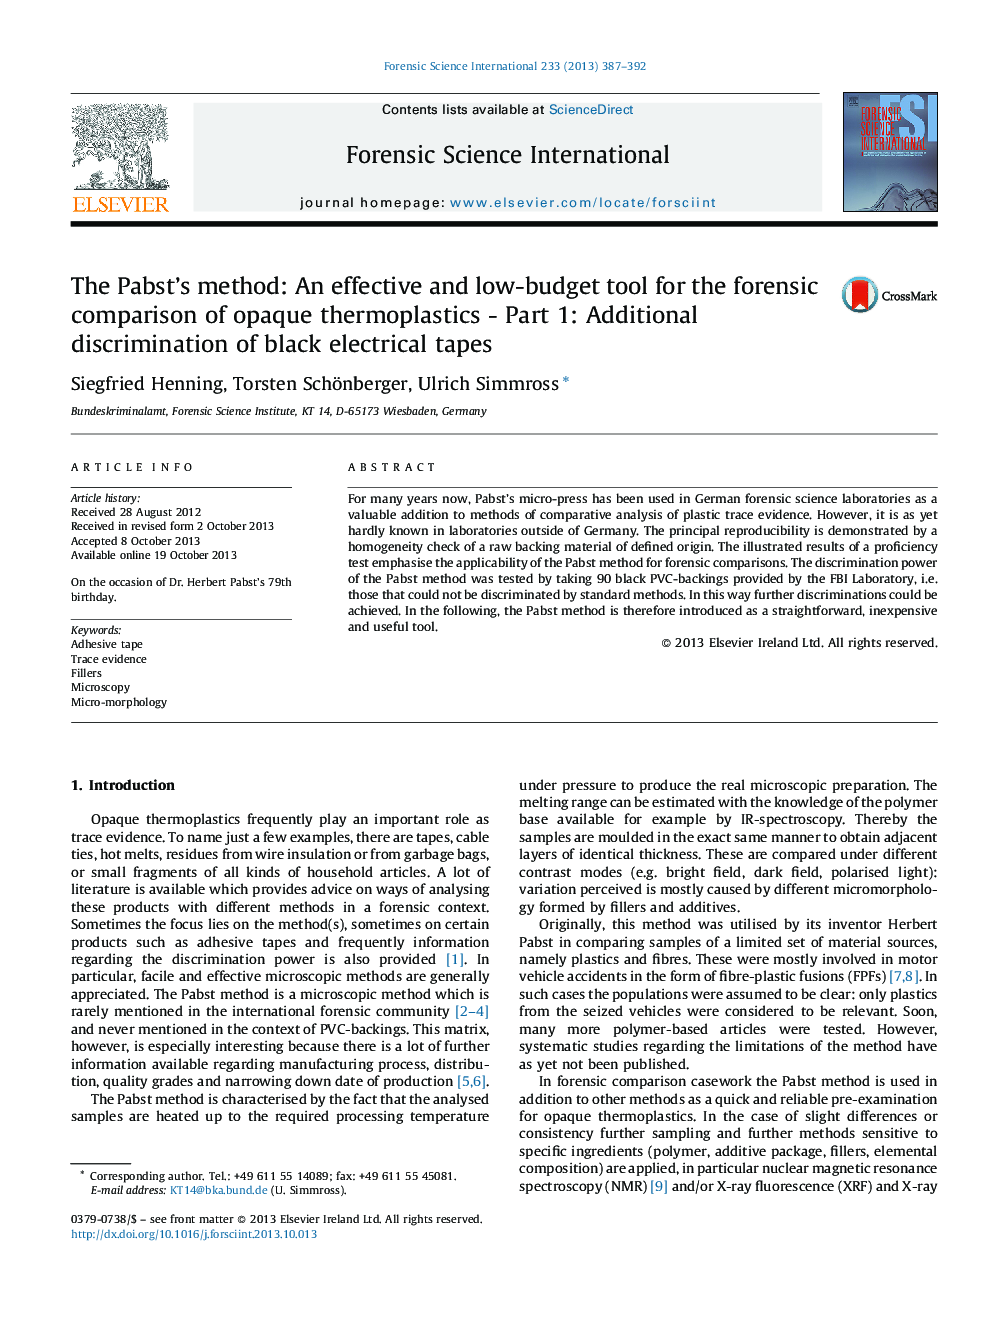 The Pabst's method: An effective and low-budget tool for the forensic comparison of opaque thermoplastics - Part 1: Additional discrimination of black electrical tapes